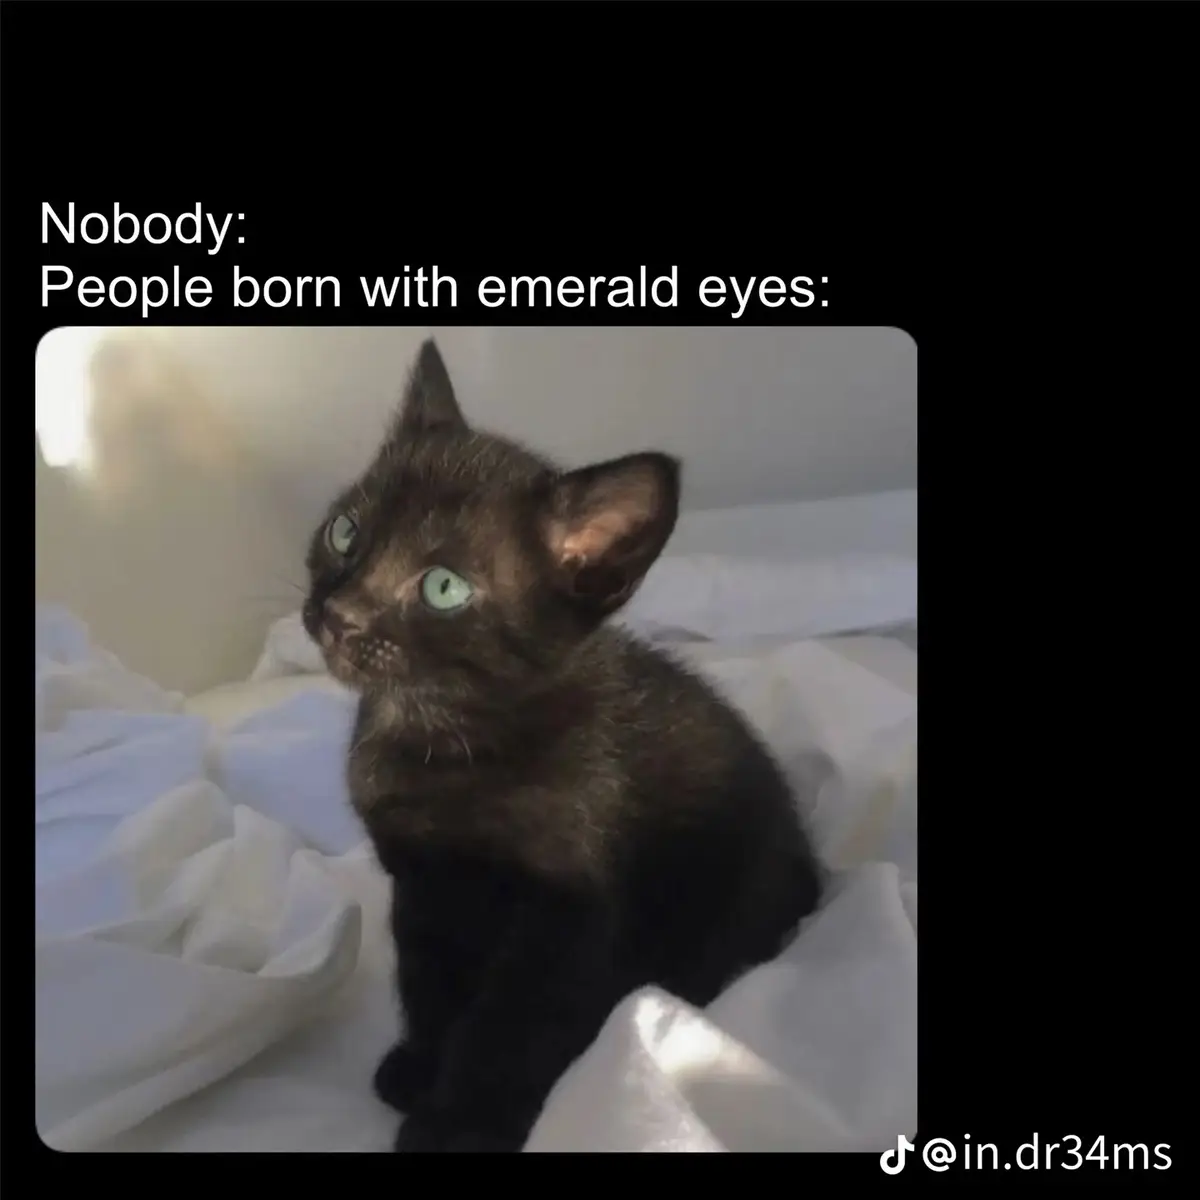 i dont think i have emerald eyes but the picture matched mine the most..